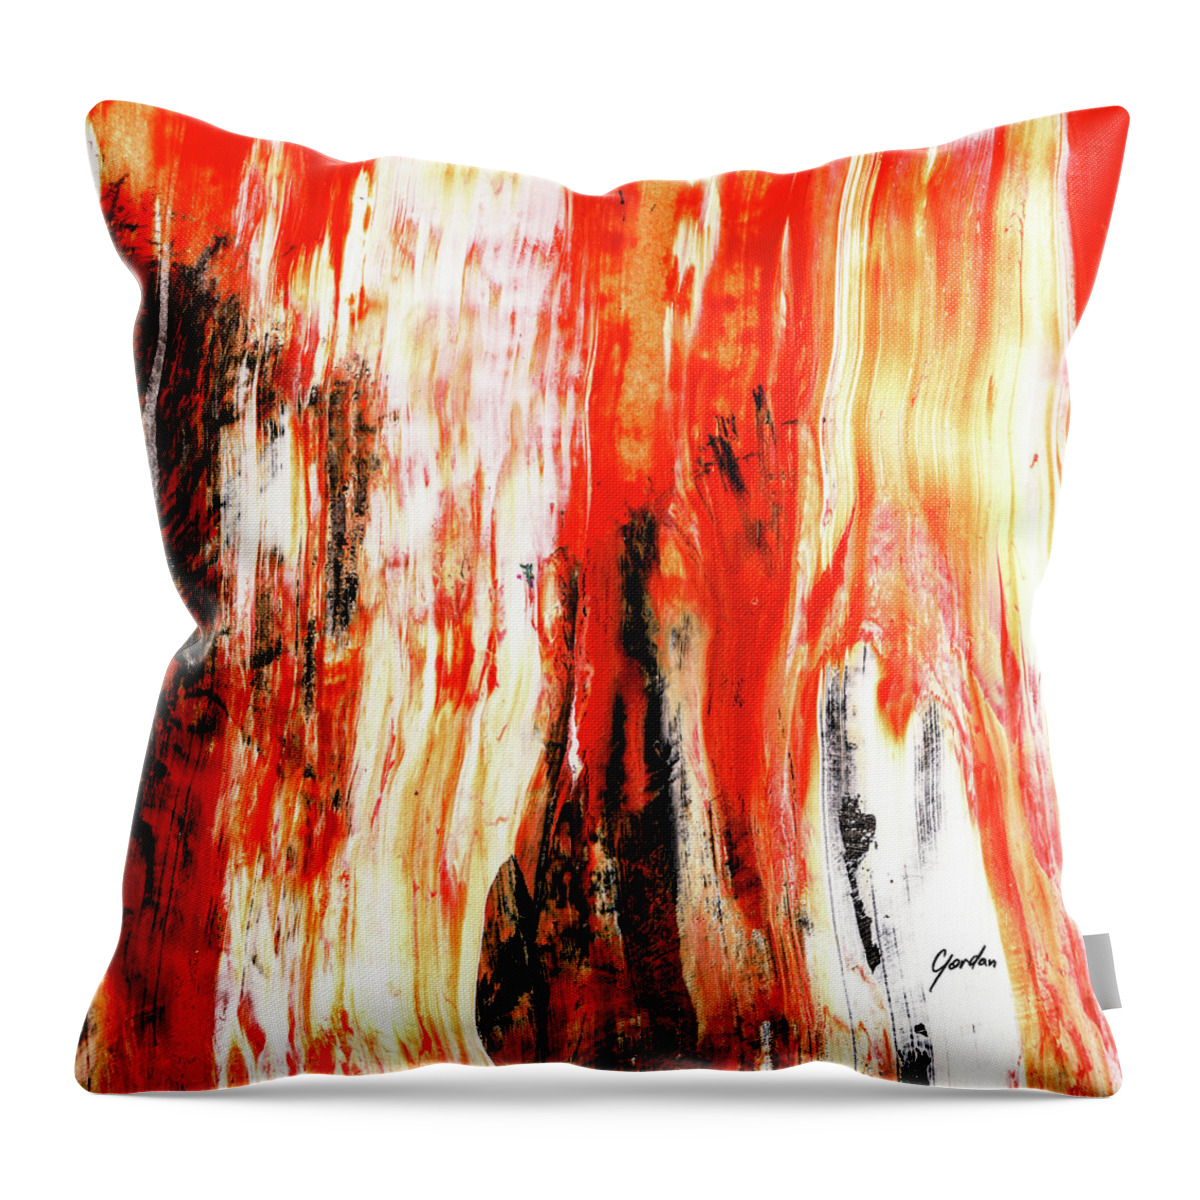 Abstract Throw Pillow featuring the painting Fire - Modern Abstract Art Painting in Red Orange Yellow And White by Modern Abstract